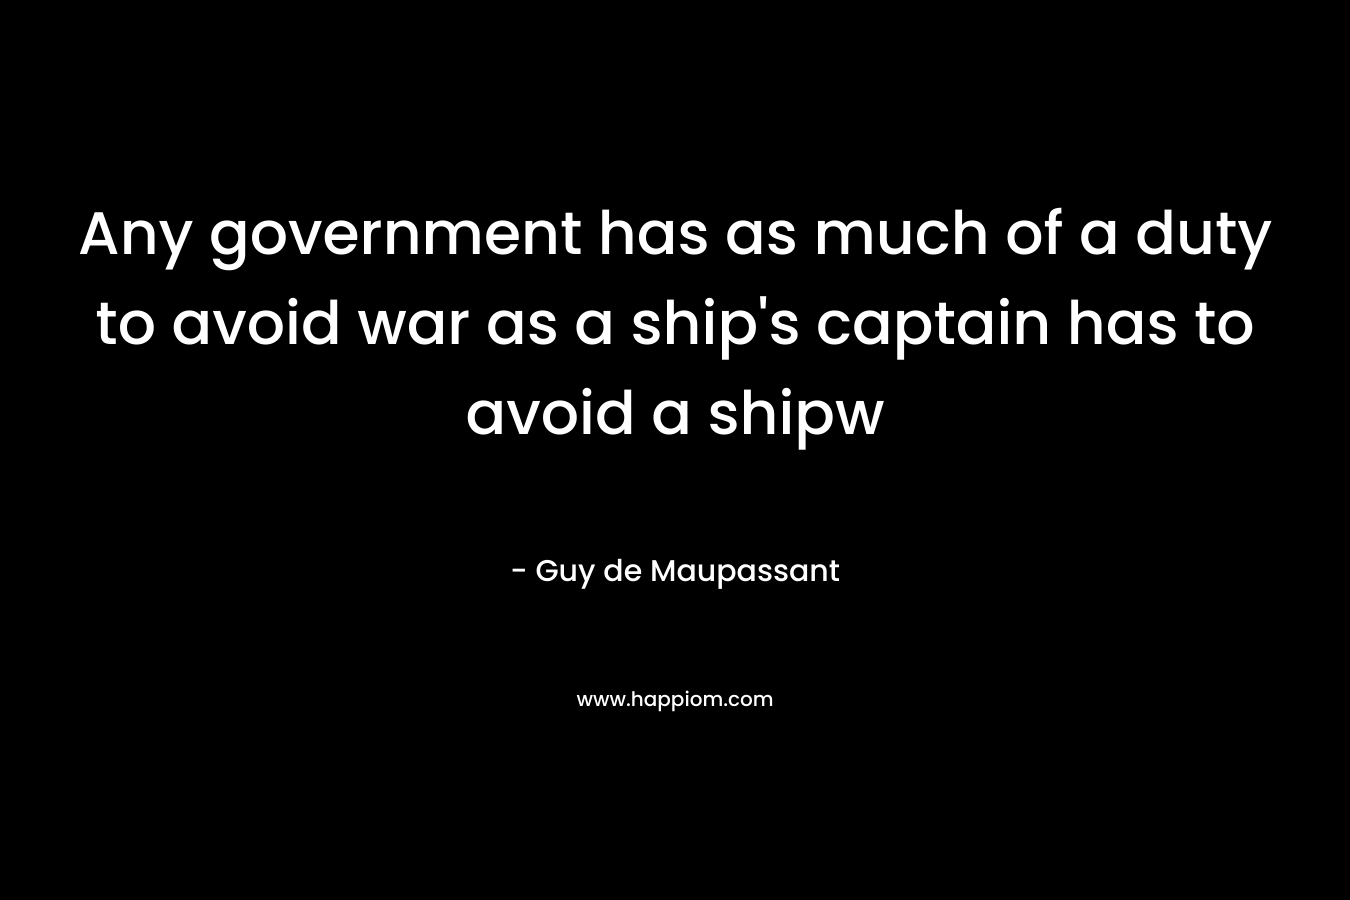 Any government has as much of a duty to avoid war as a ship’s captain has to avoid a shipw – Guy de Maupassant